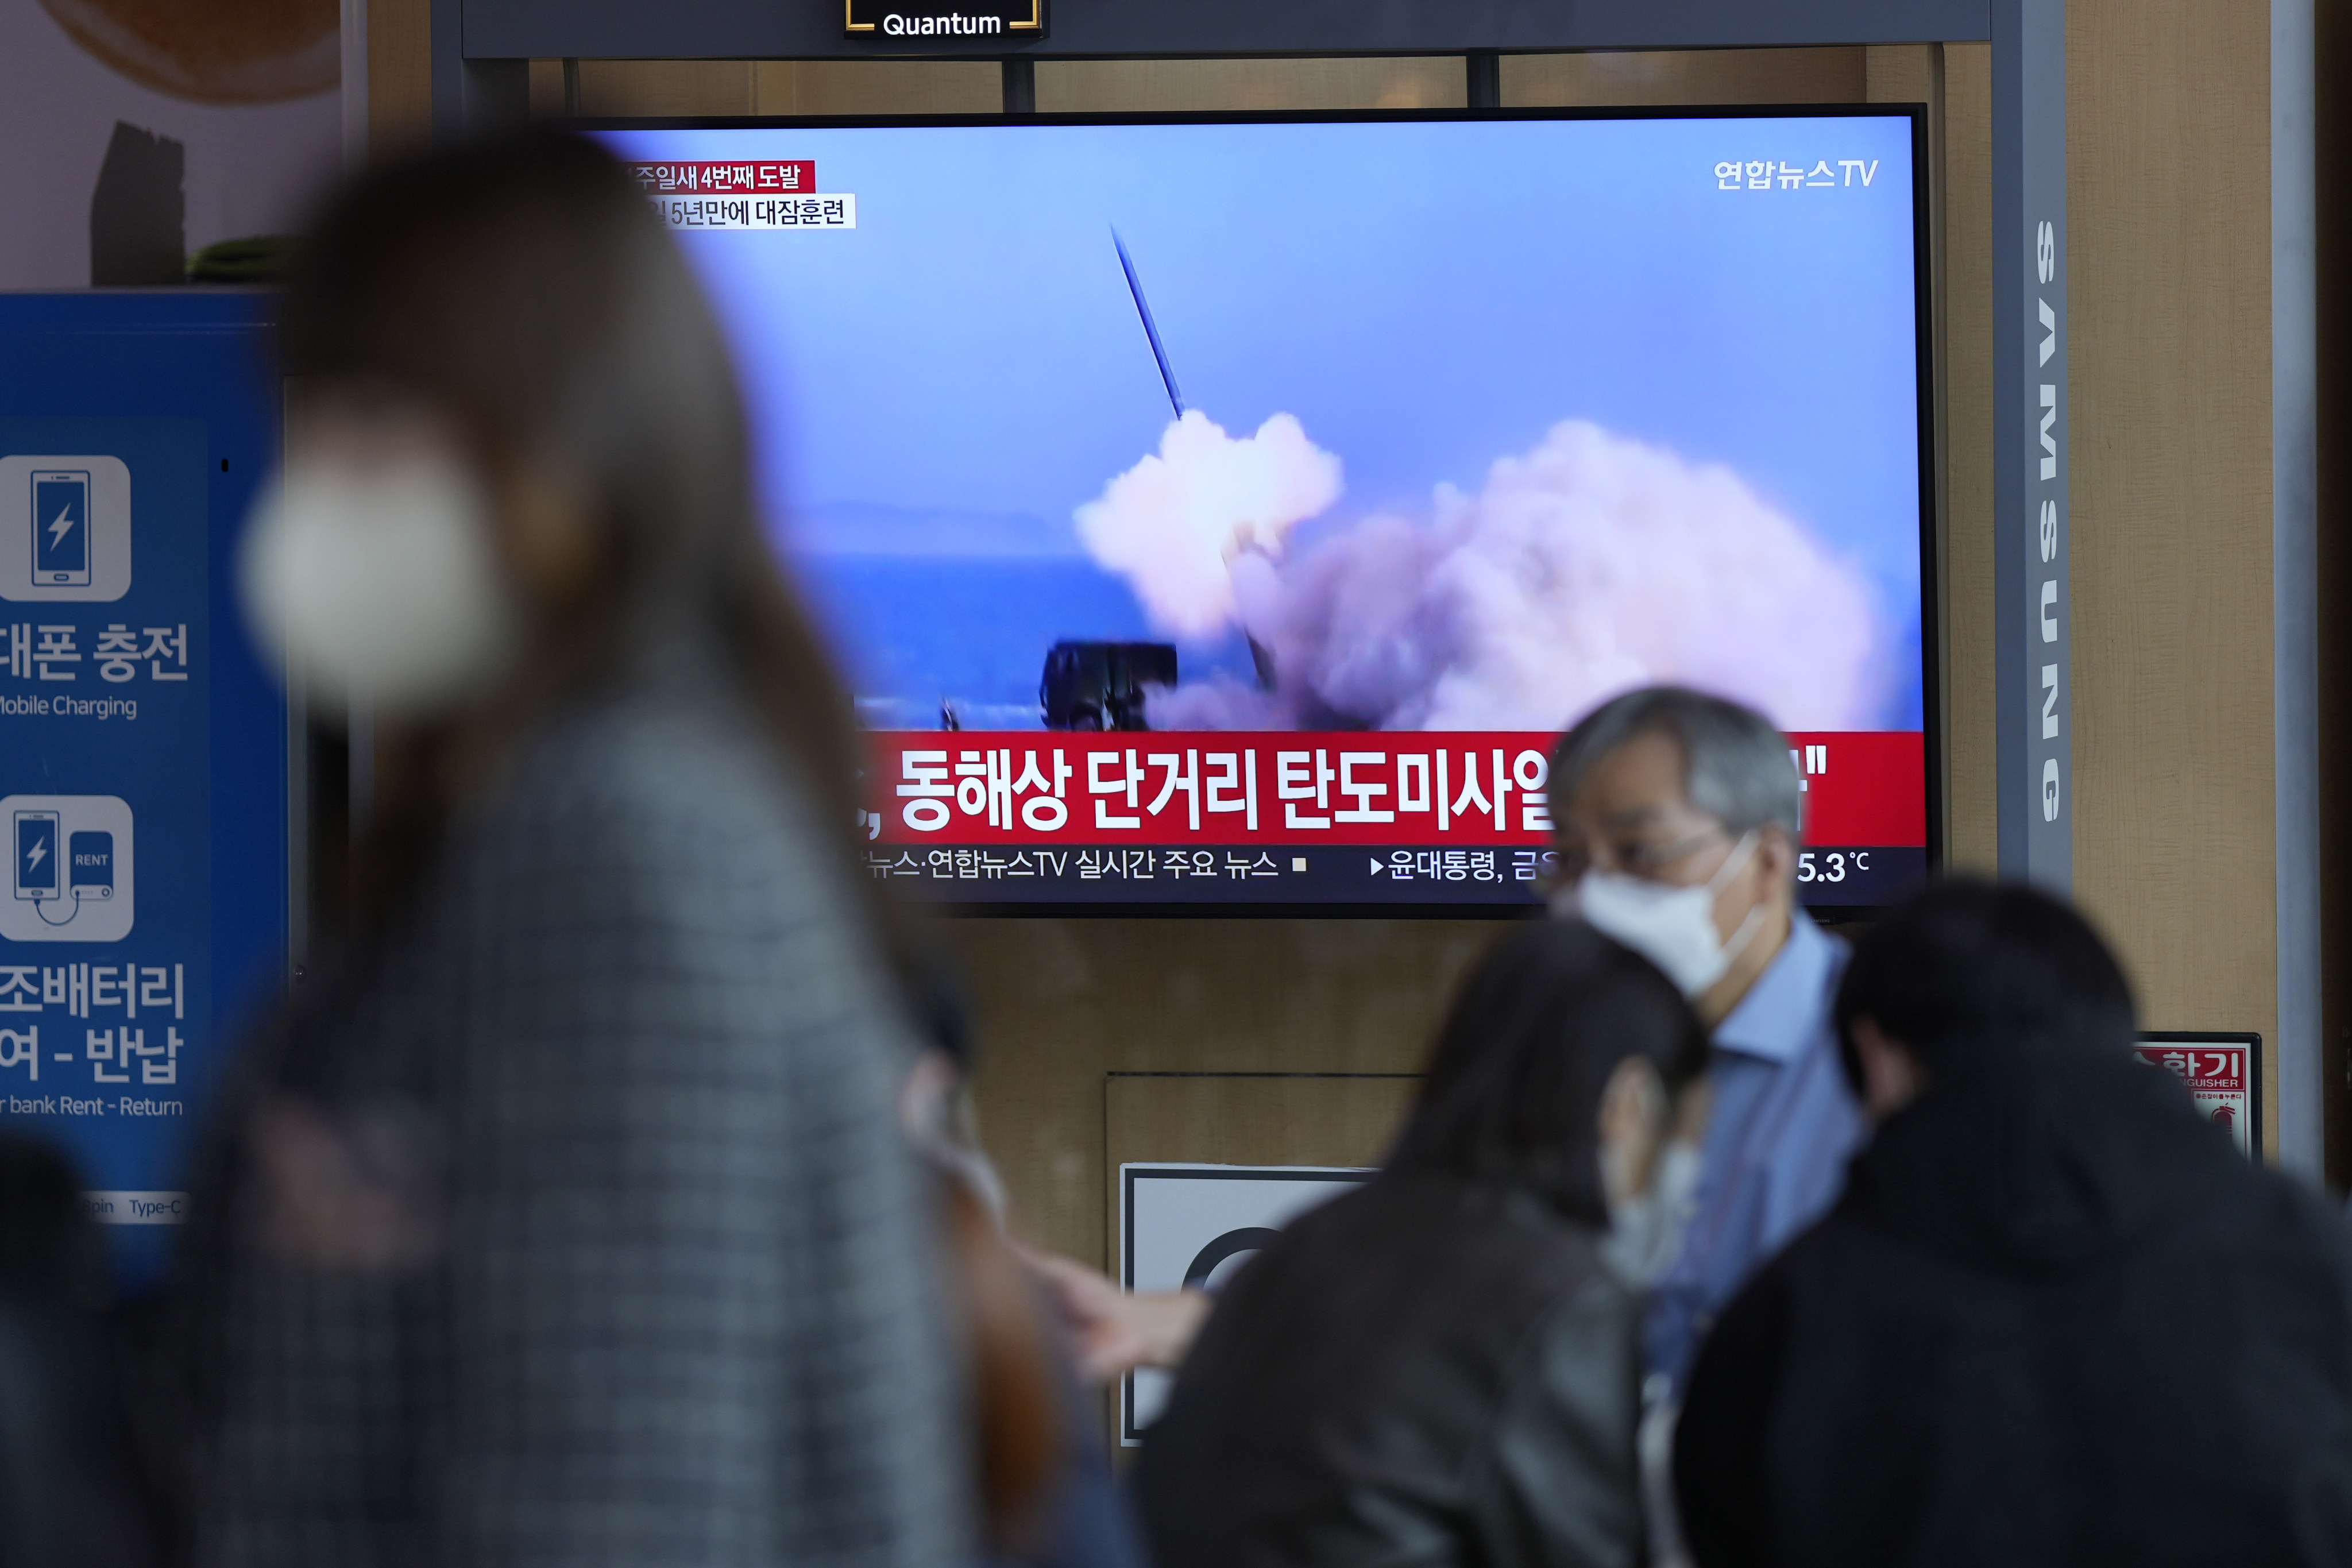 A TV screen in Seoul on Friday shows a news report with file footage of a North Korean missile launch. Photo: AP